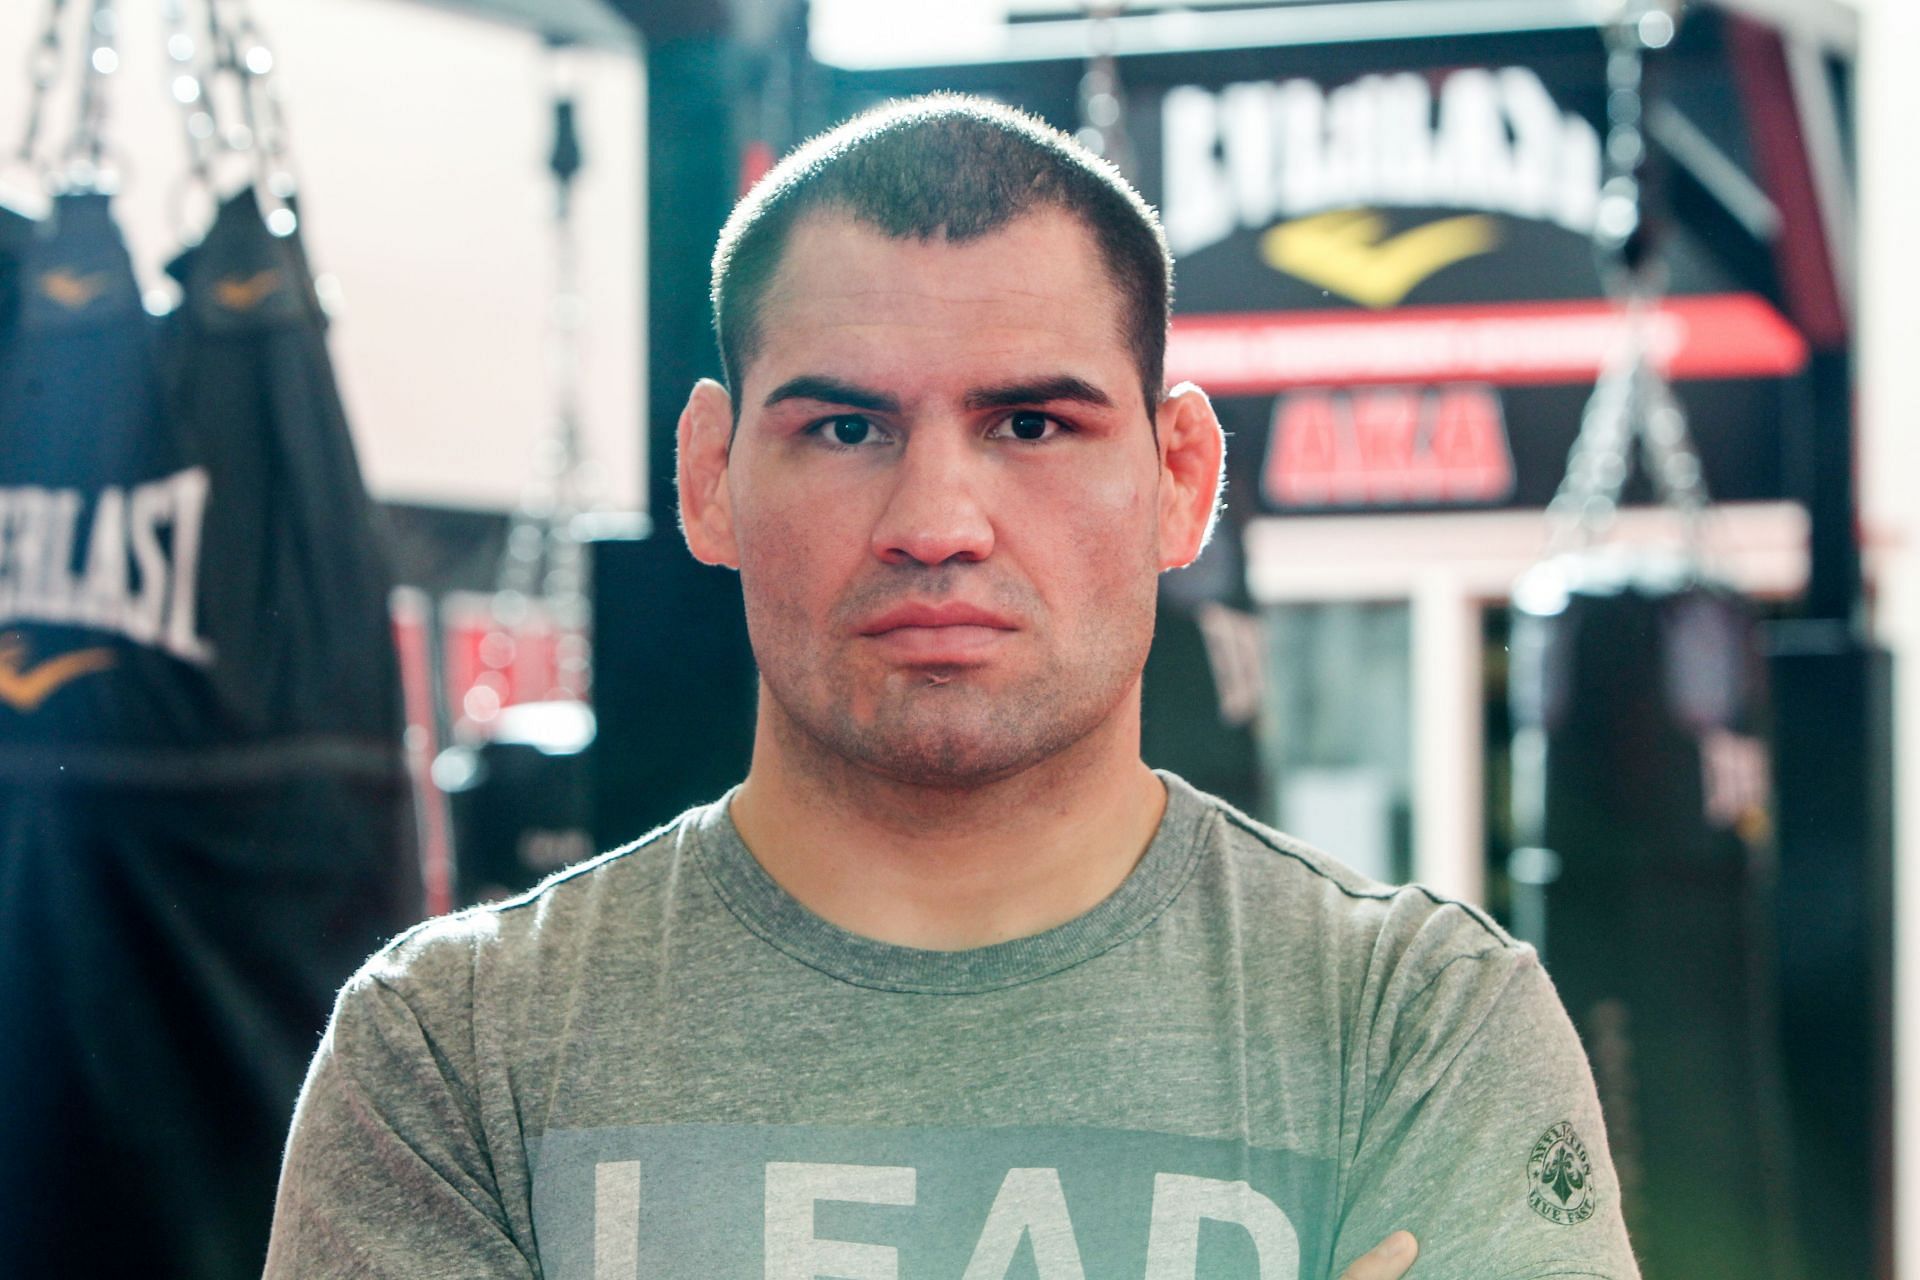 Cain Velasquez has been granted a new bail hearing